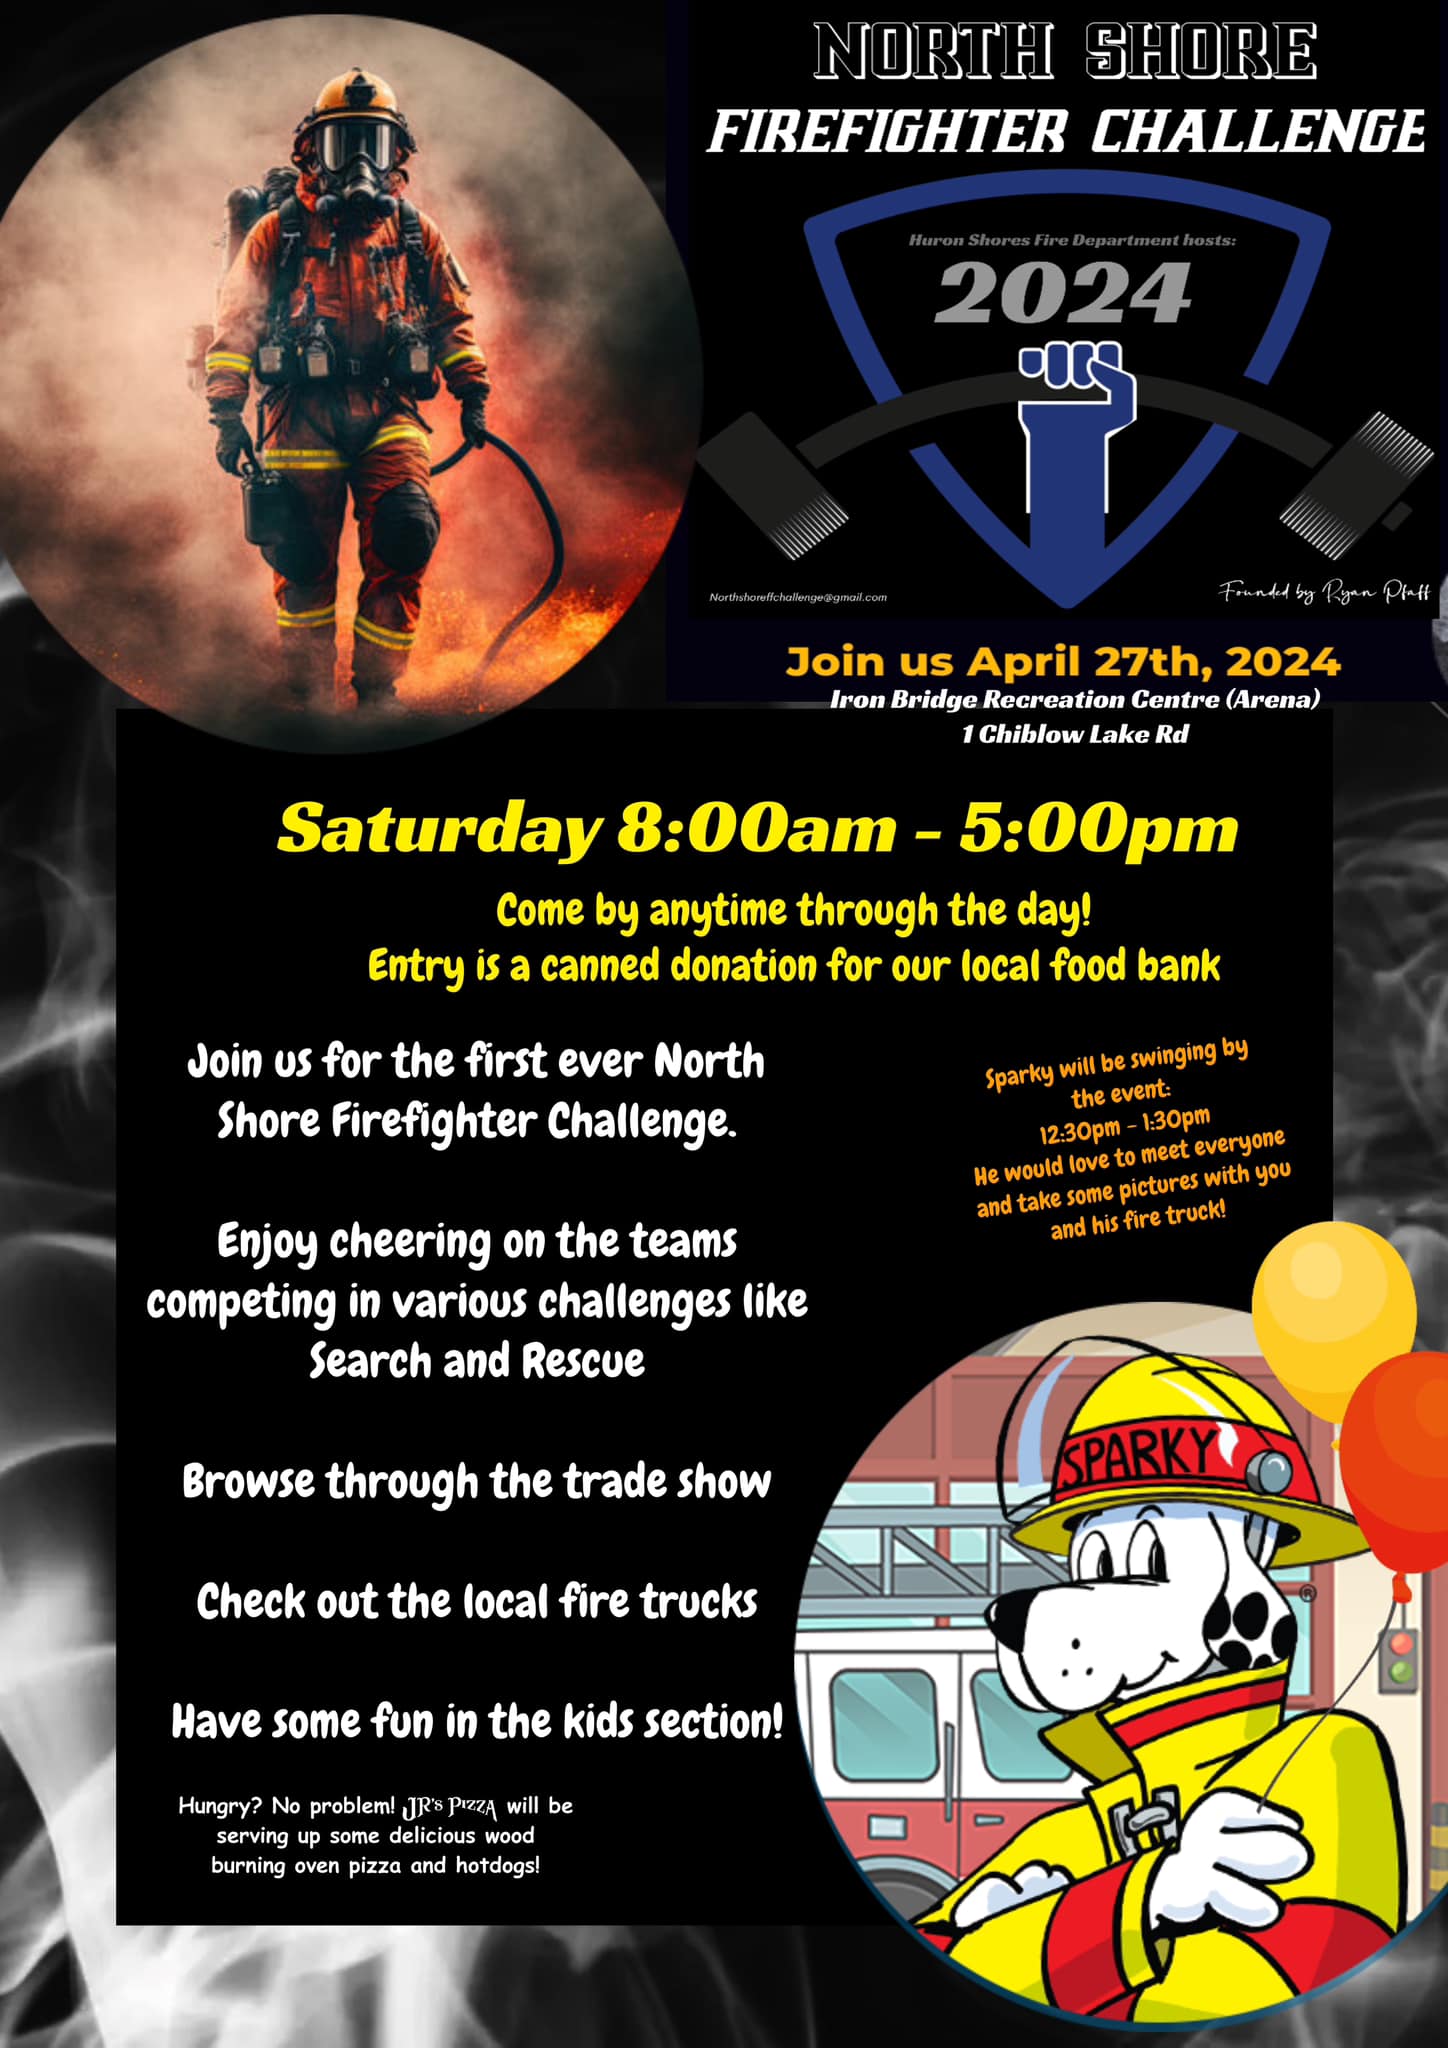 Join us for the first ever North Shore Firefighter Challenge. Enjoy cheering on the teams competing in various challenges like Search and Rescue, browse through the trade show, check out the local fire trucks, and have some fun in the kids sections. Jr.s Pizza will be serving up some delicious wood burning oven pizza and hot dogs. Sparky will be swing by the event. Come out anytime through the day! Entry is a canned donation for the local food bank. 